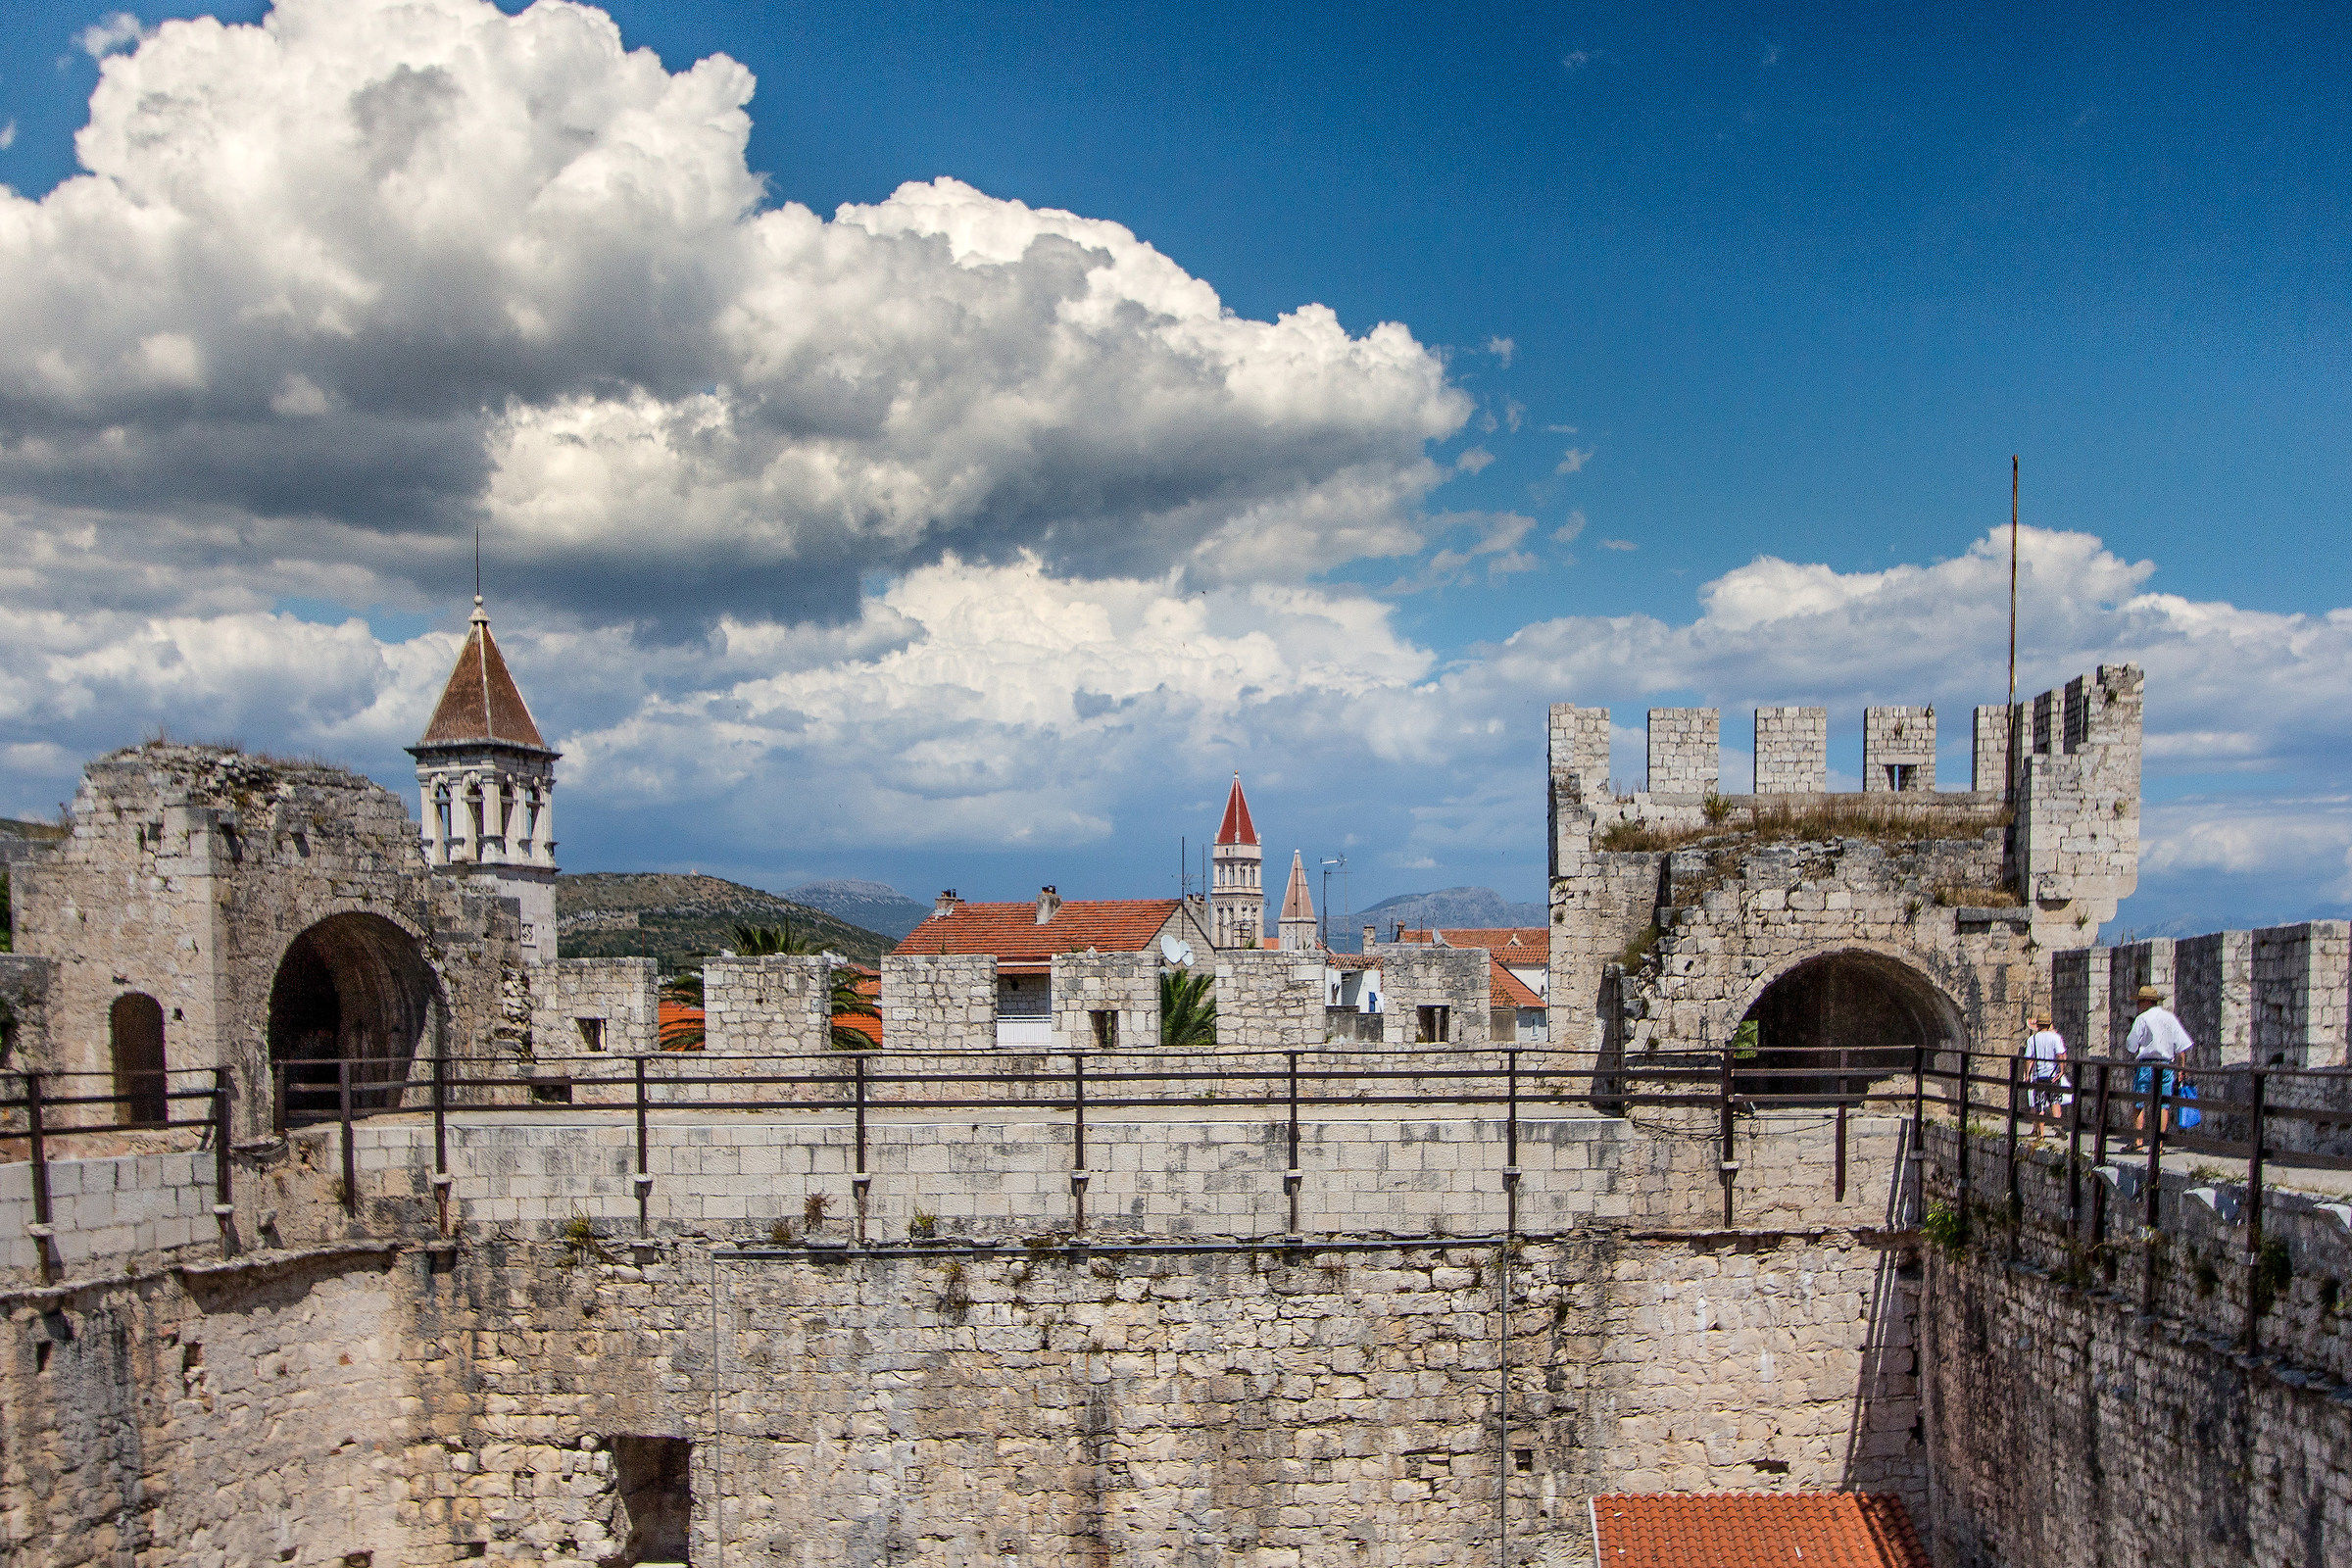 From the Trogir bastion...